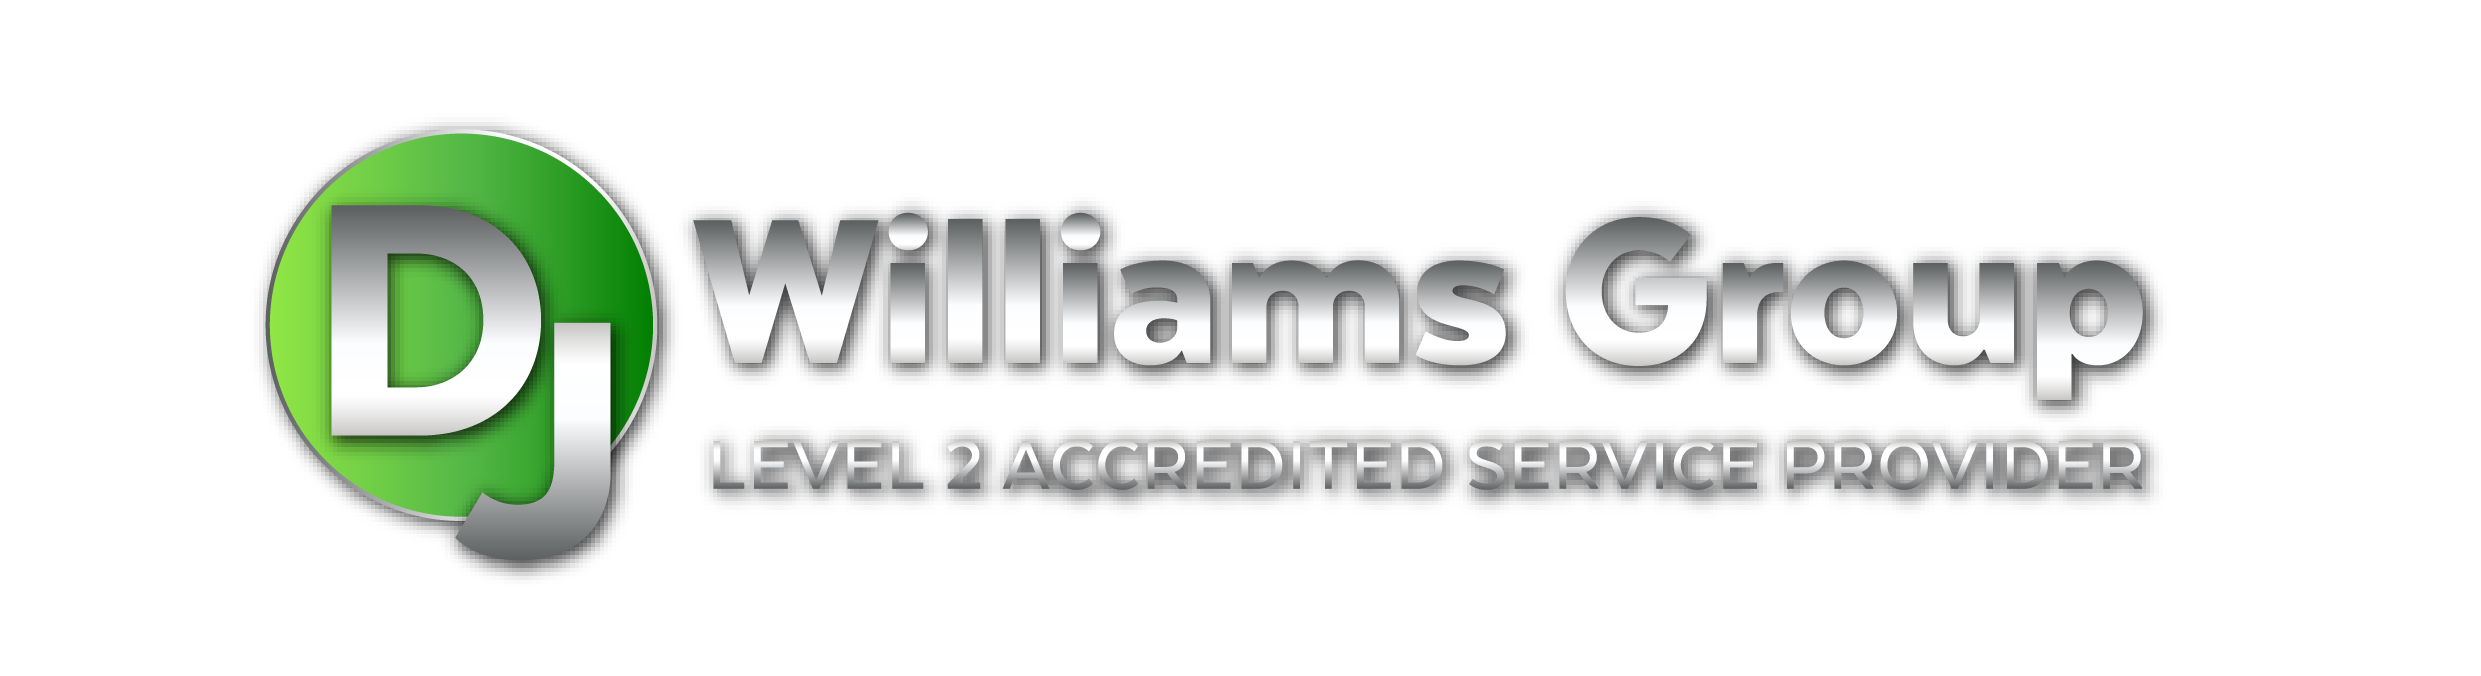 D J Williams Electrical Group